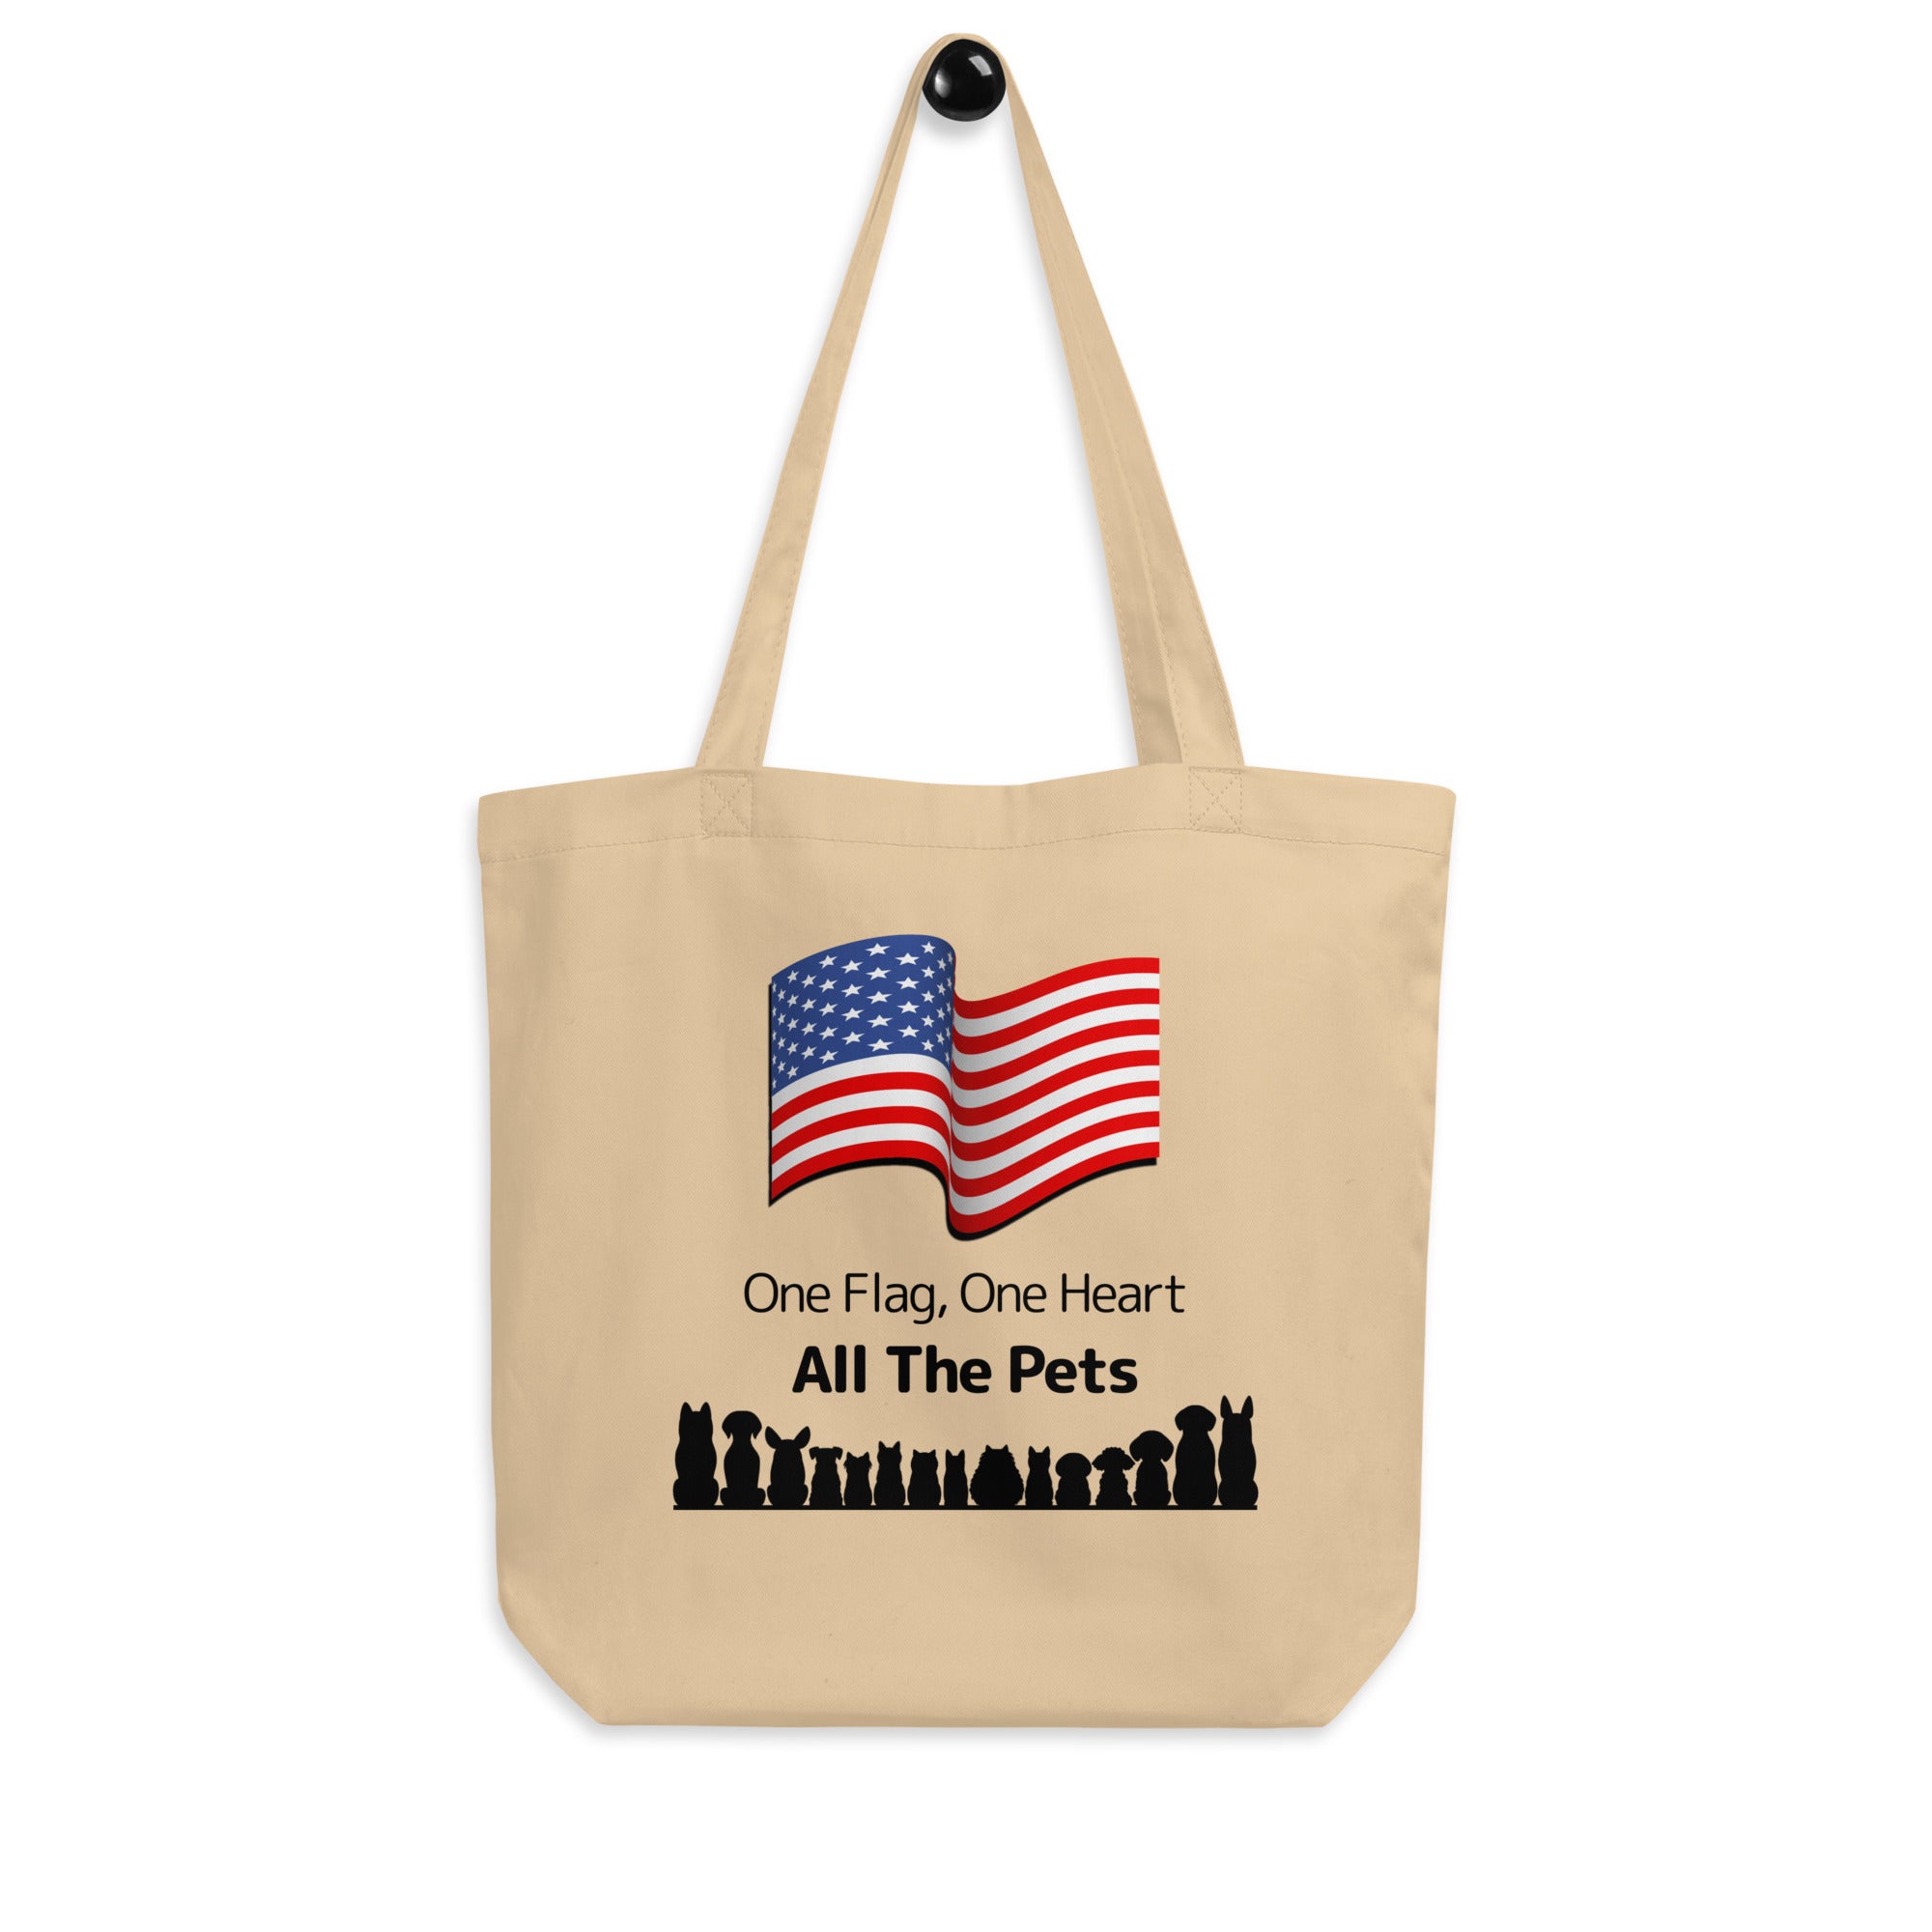 One Flag, One Heart, All the Pets Eco Tote Bag